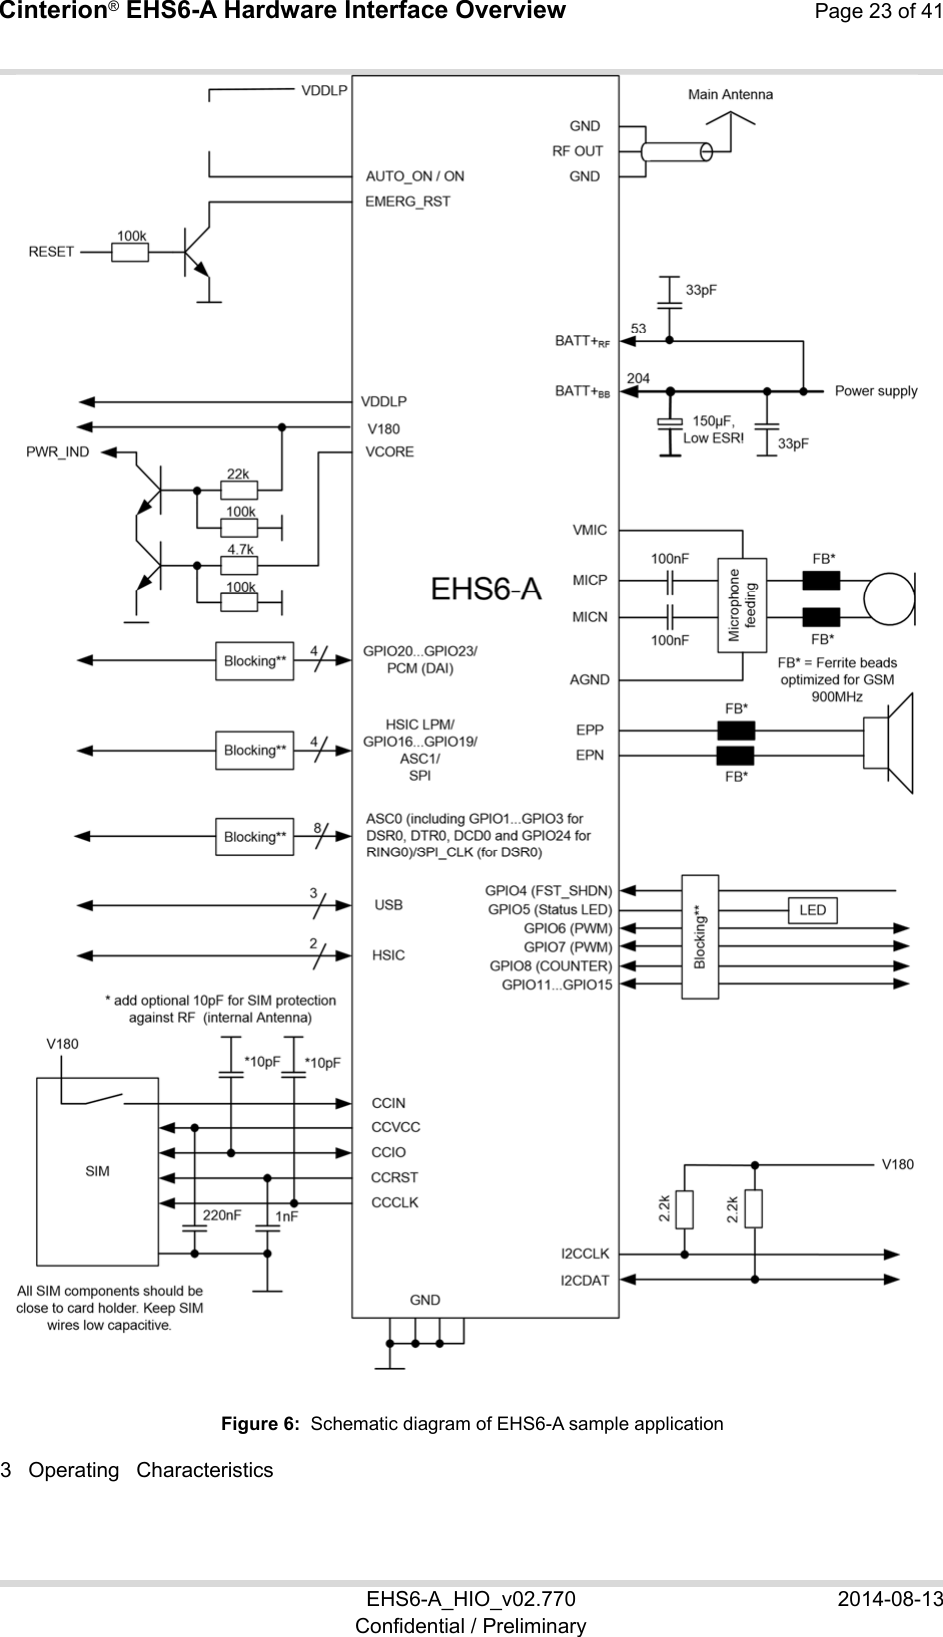 Cinterion® EHS6-A Hardware Interface Overview Page 23 of 41 EHS6-A_HIO_v02.770  2014-08-13 Confidential / Preliminary  Figure 6:  Schematic diagram of EHS6-A sample application 3  Operating  Characteristics 24 